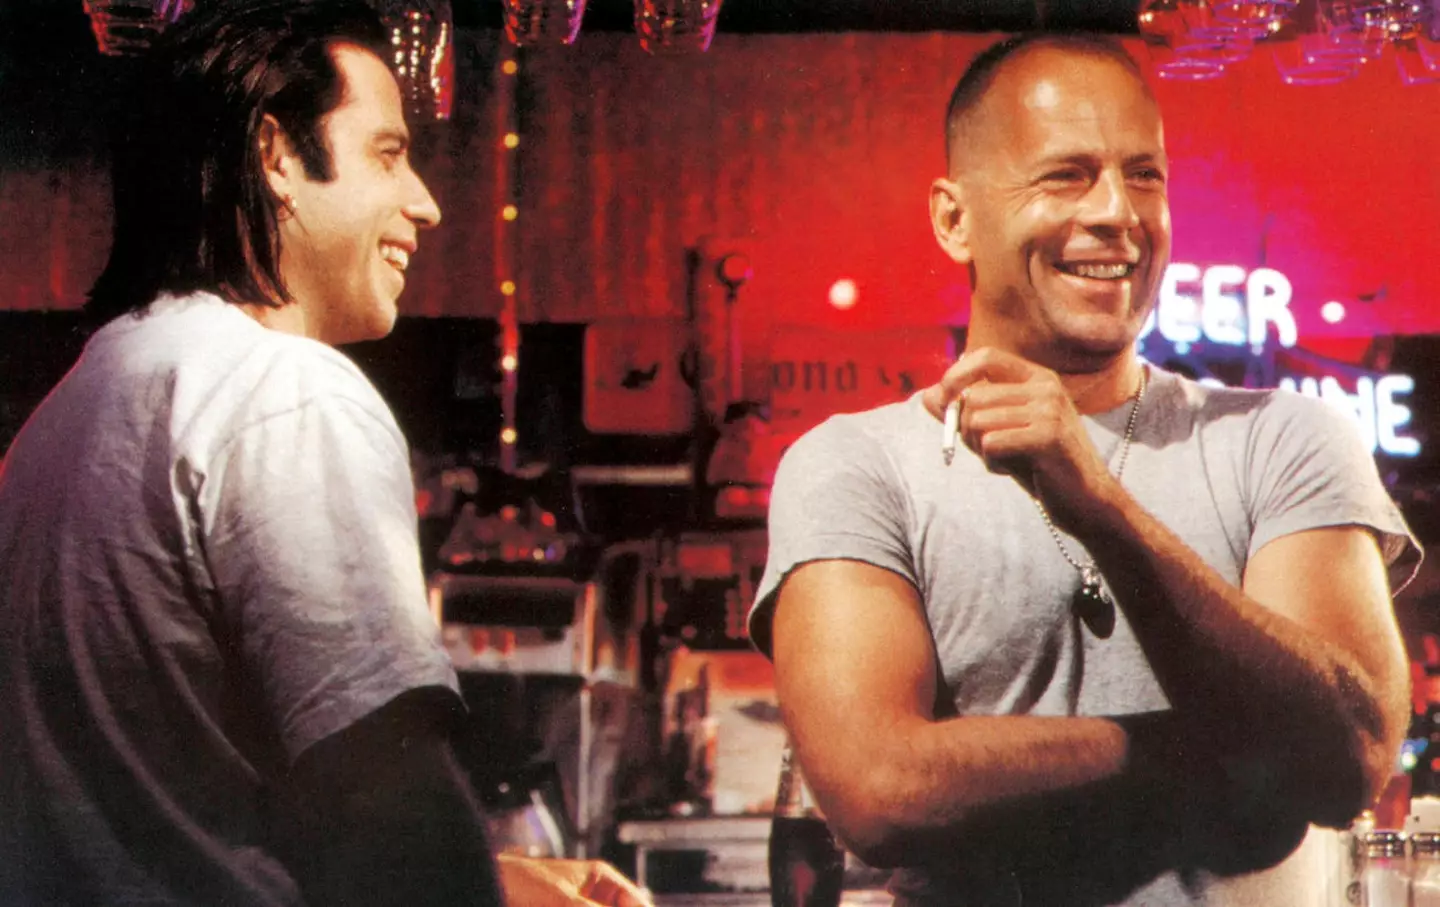 John Travolta and Bruce Willis starred in 1994's Pulp Fiction. Collection Christophel / Alamy Stock Photo